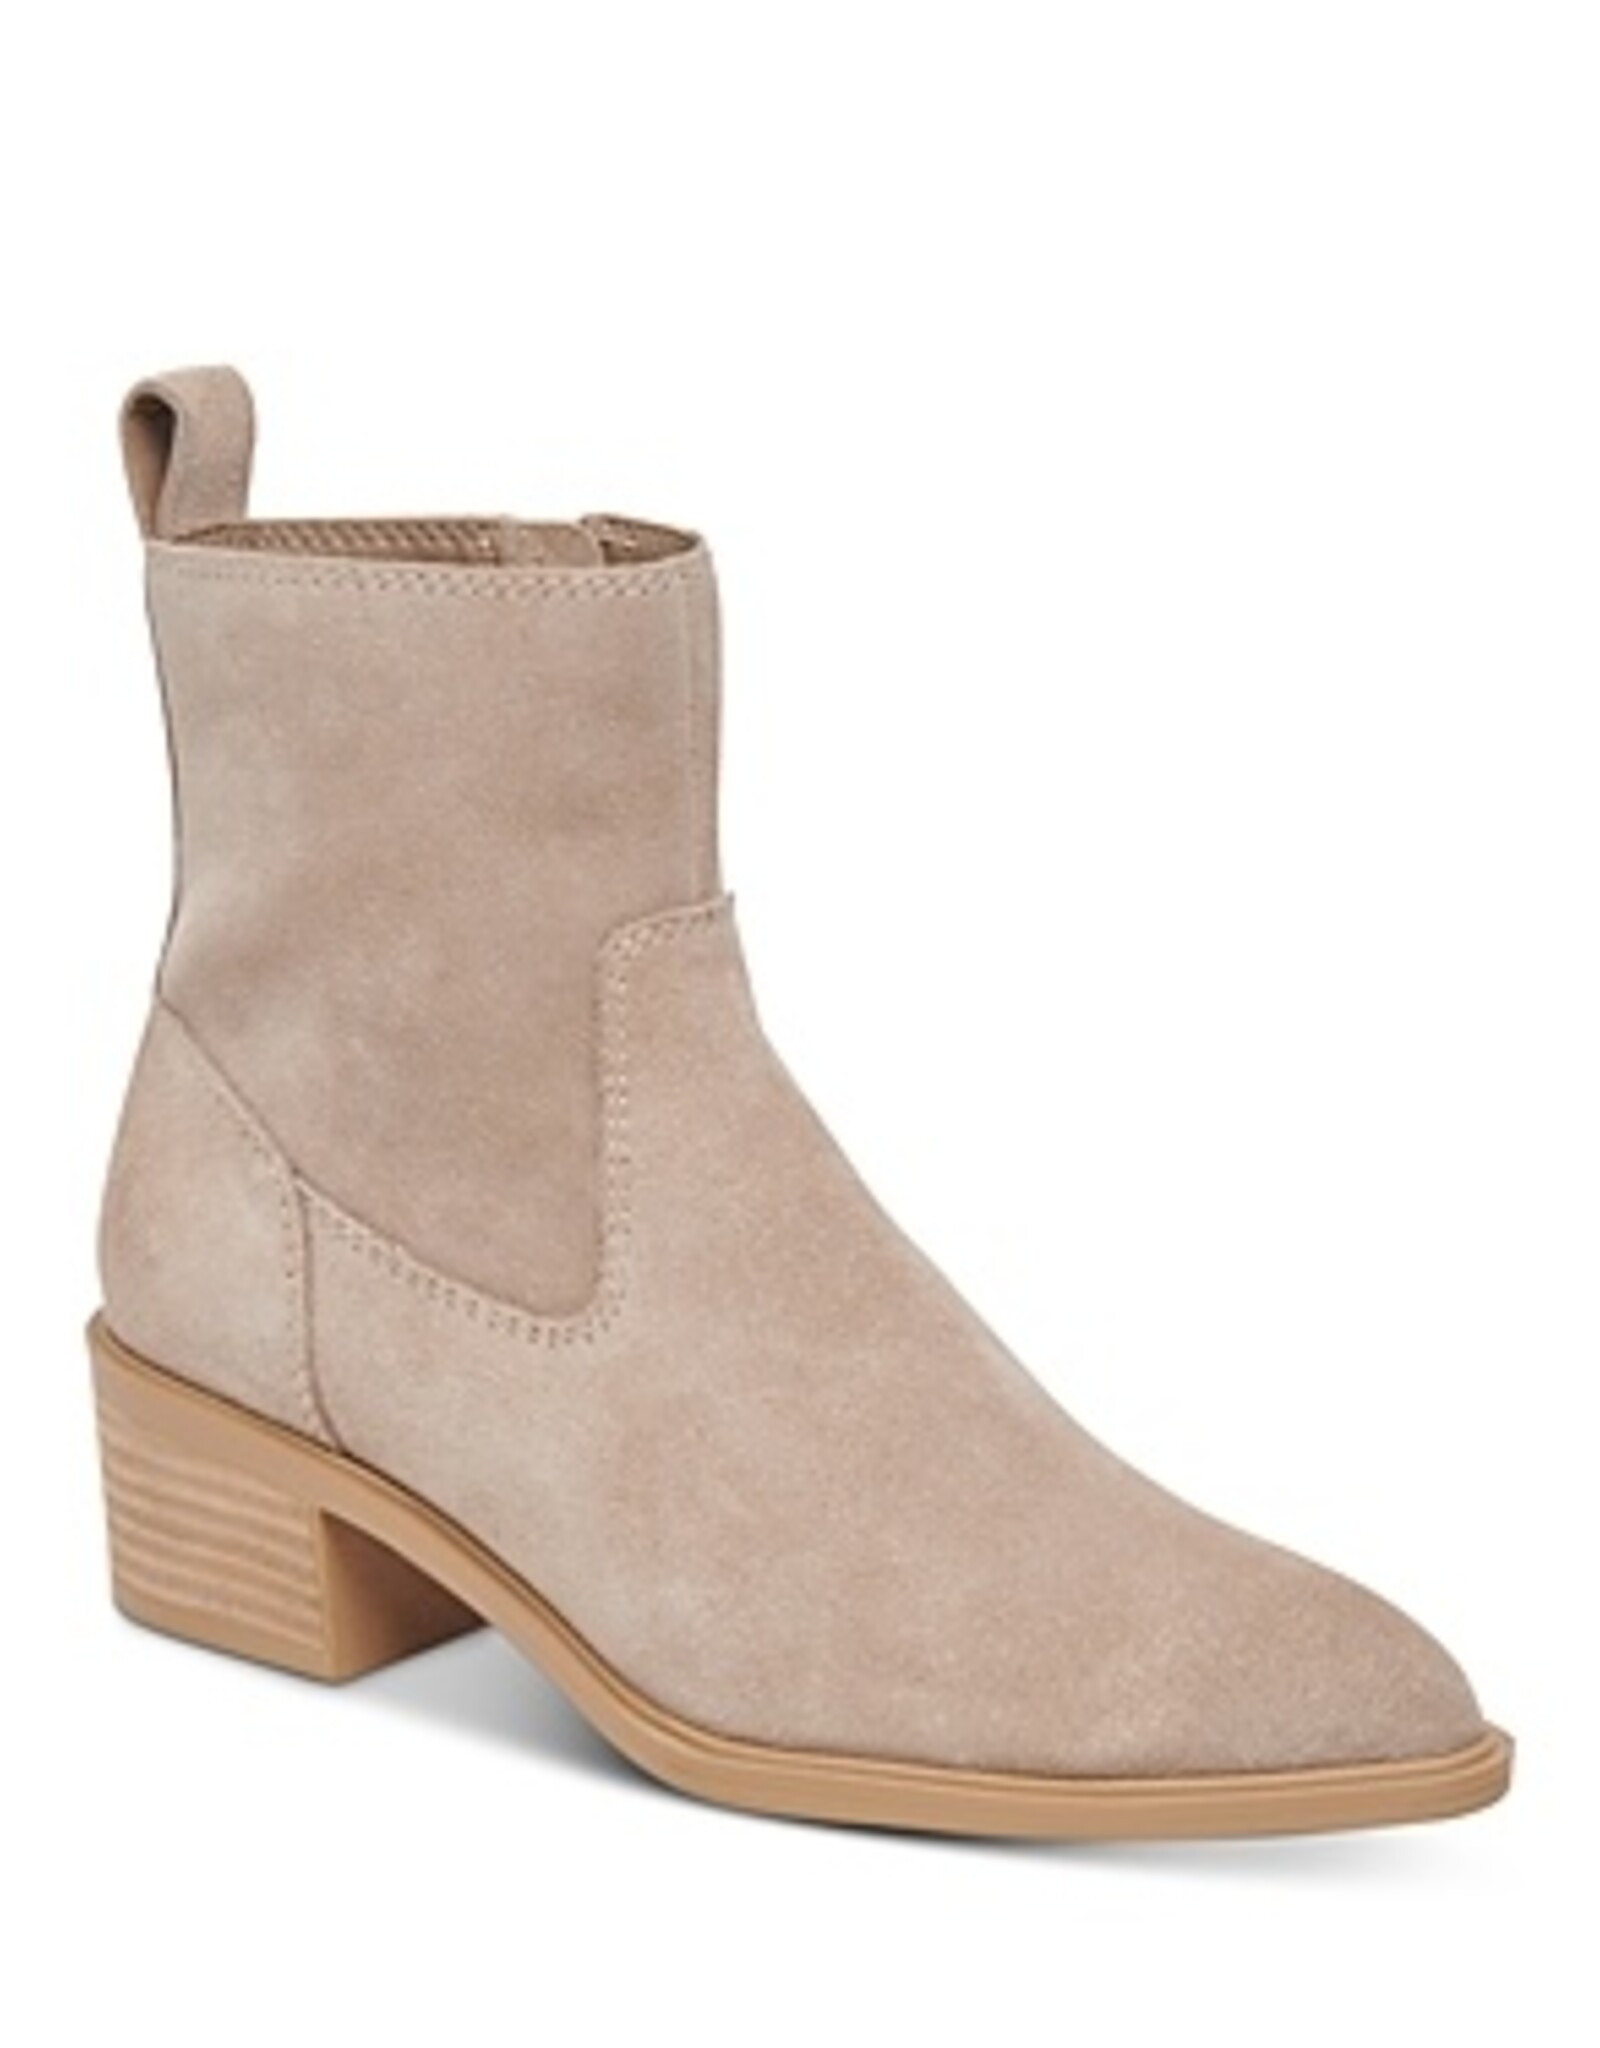 Bili H2O Suede Booties- Taupe